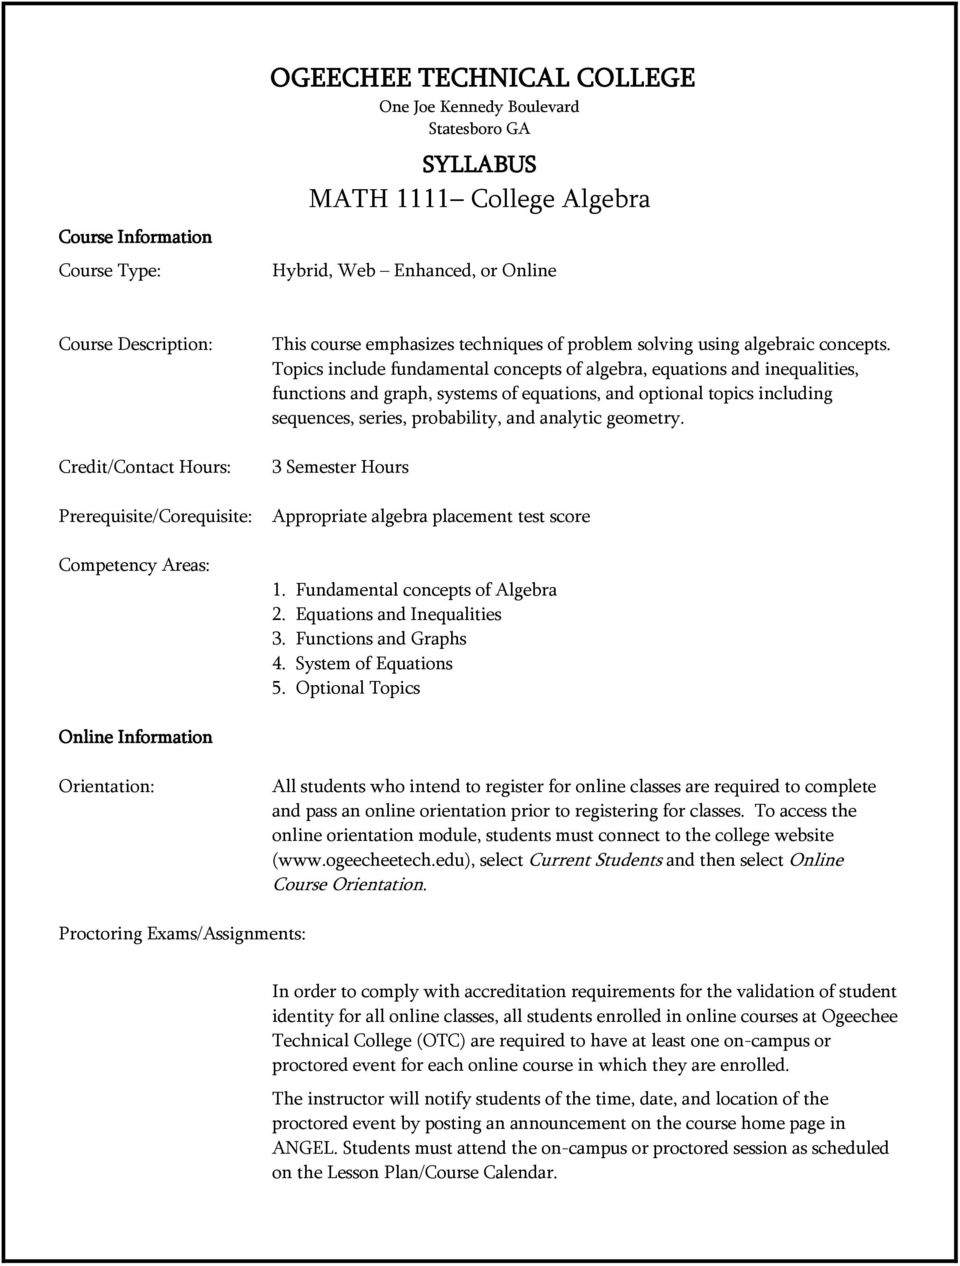 Topics include fundamental concepts of algebra, equations and inequalities, functions and graph, systems of equations, and optional topics including sequences, series, probability, and analytic